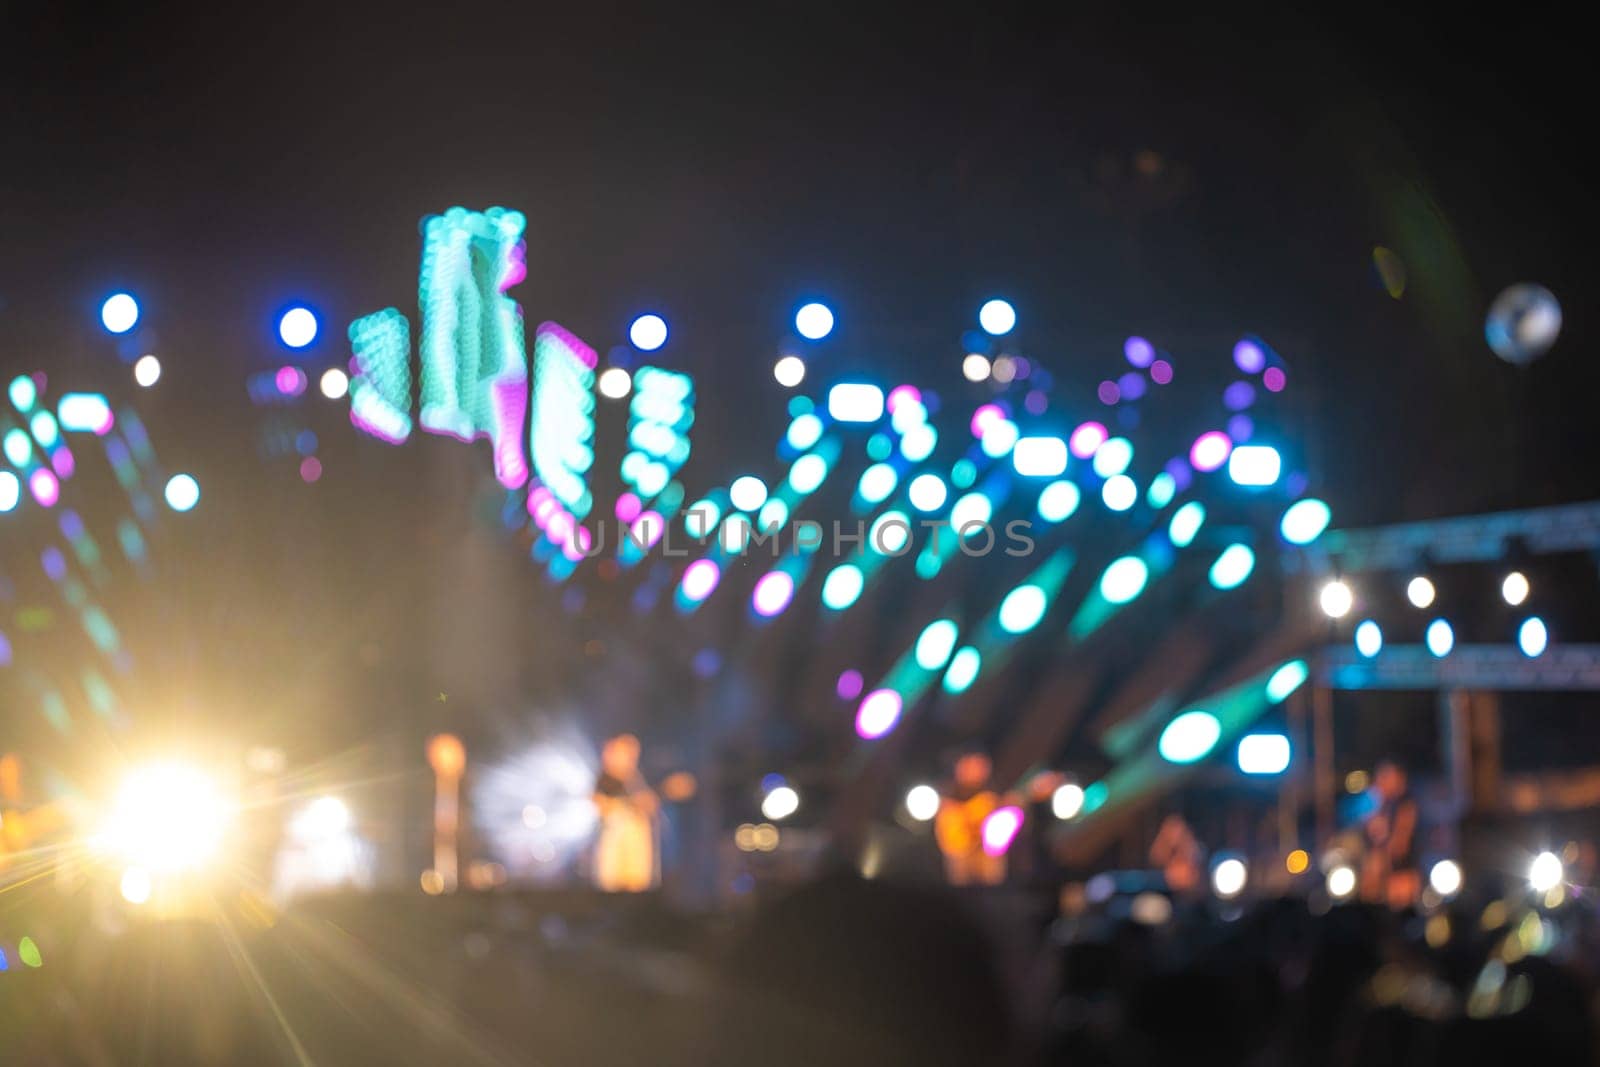 Amid vibrant nightlife a concert festival takes center stage and unrecognizable crowd cheers in front of brilliantly illuminated stage. lens flare captures energy and excitement of music event. by Sorapop